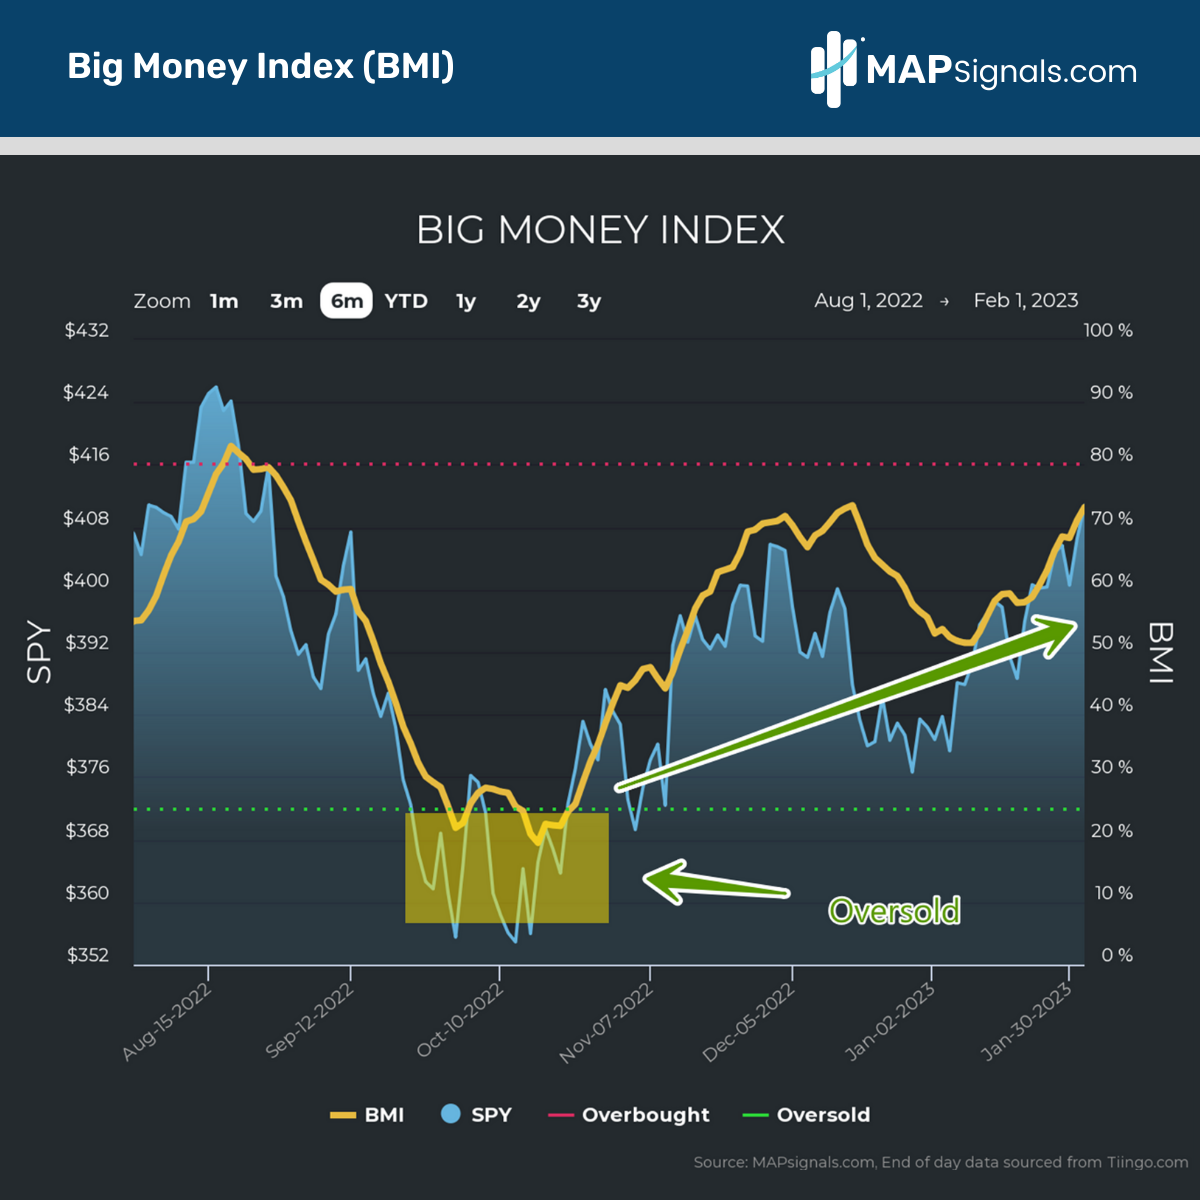 A rising BMI indicates demand for stocks is gaining | Big Money Index